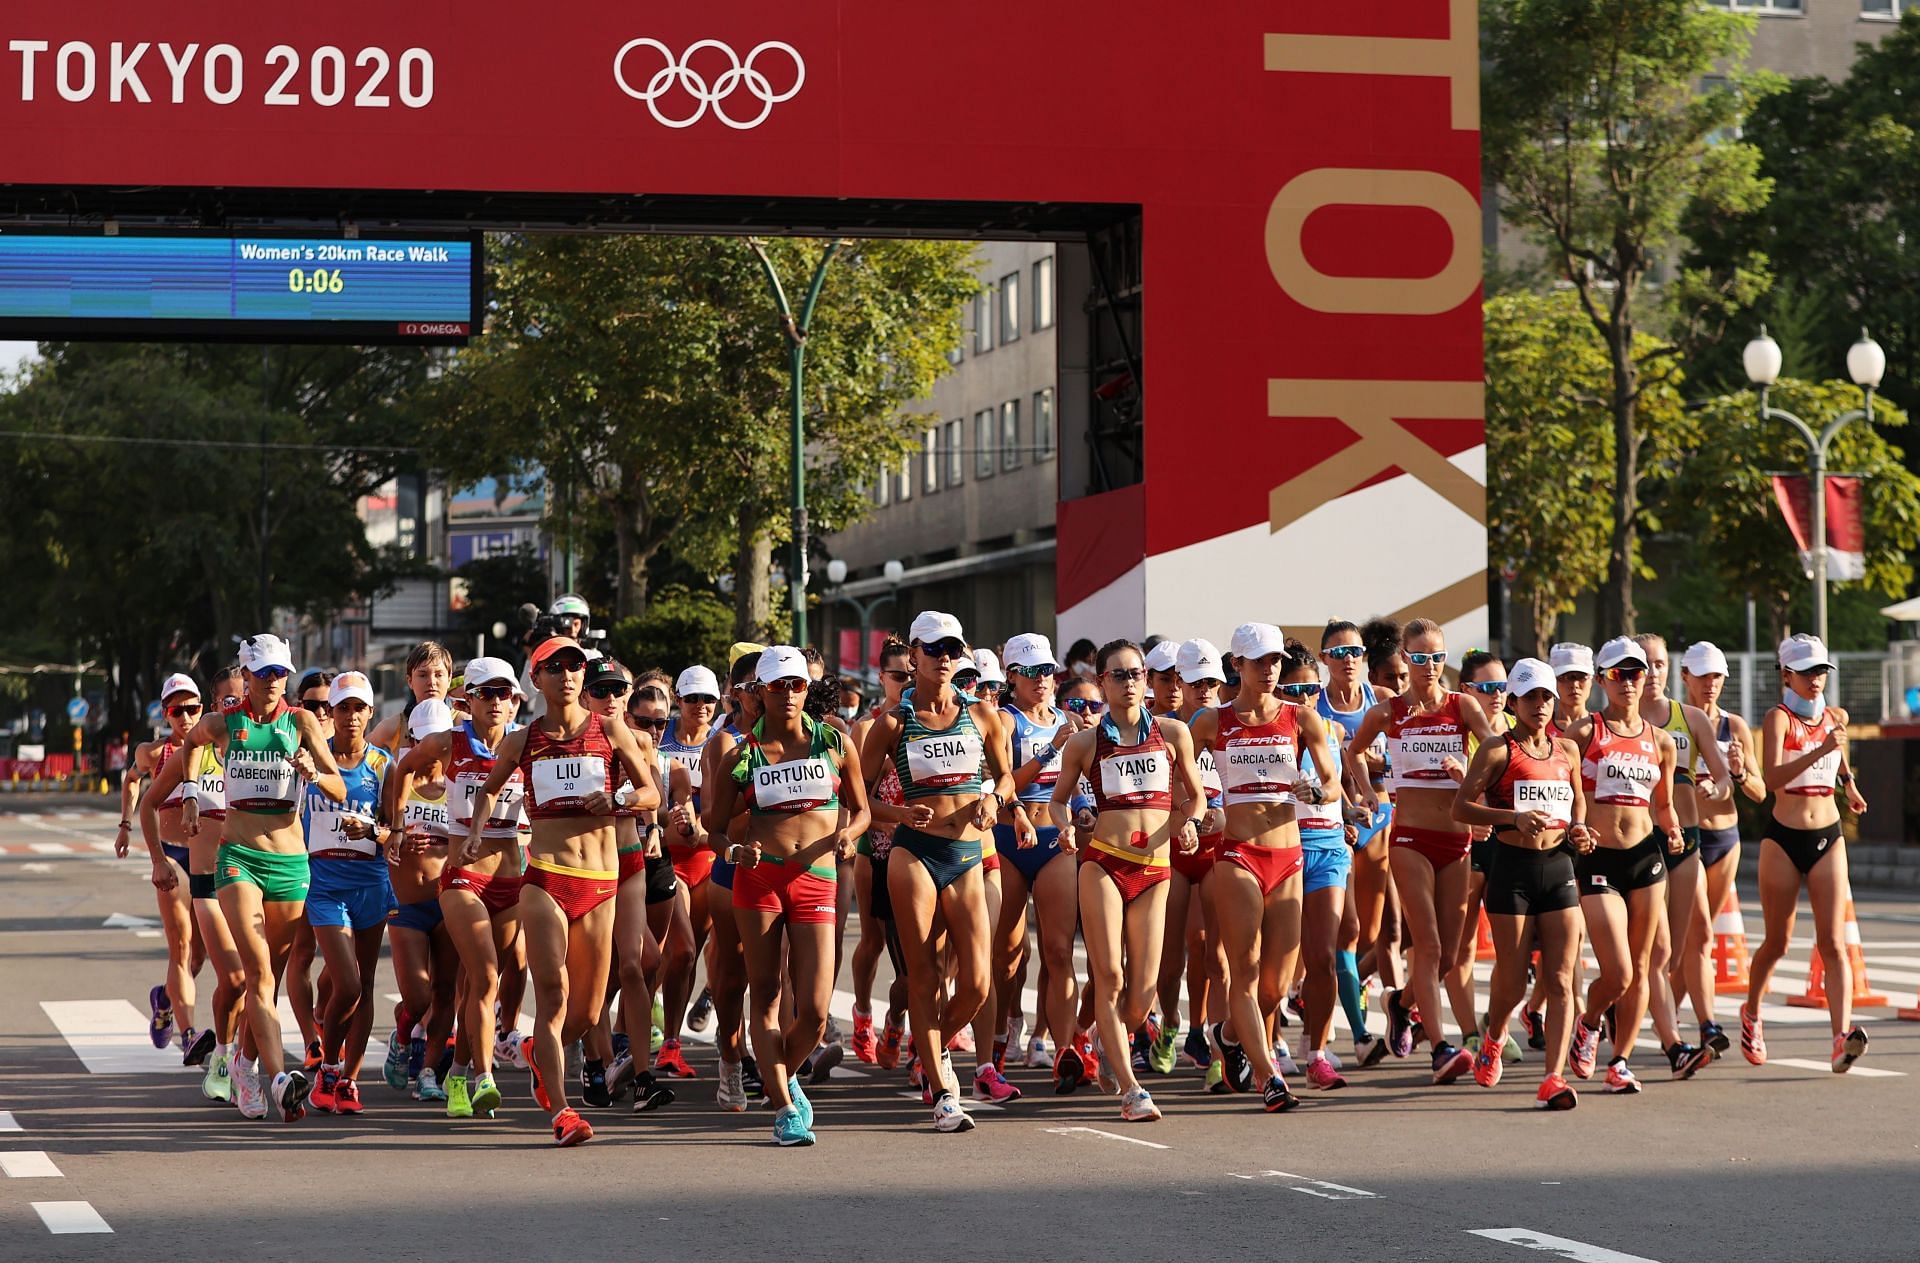 A race walk event in progress at the Tokyo Olympics (Image courtesy: Getty Images)